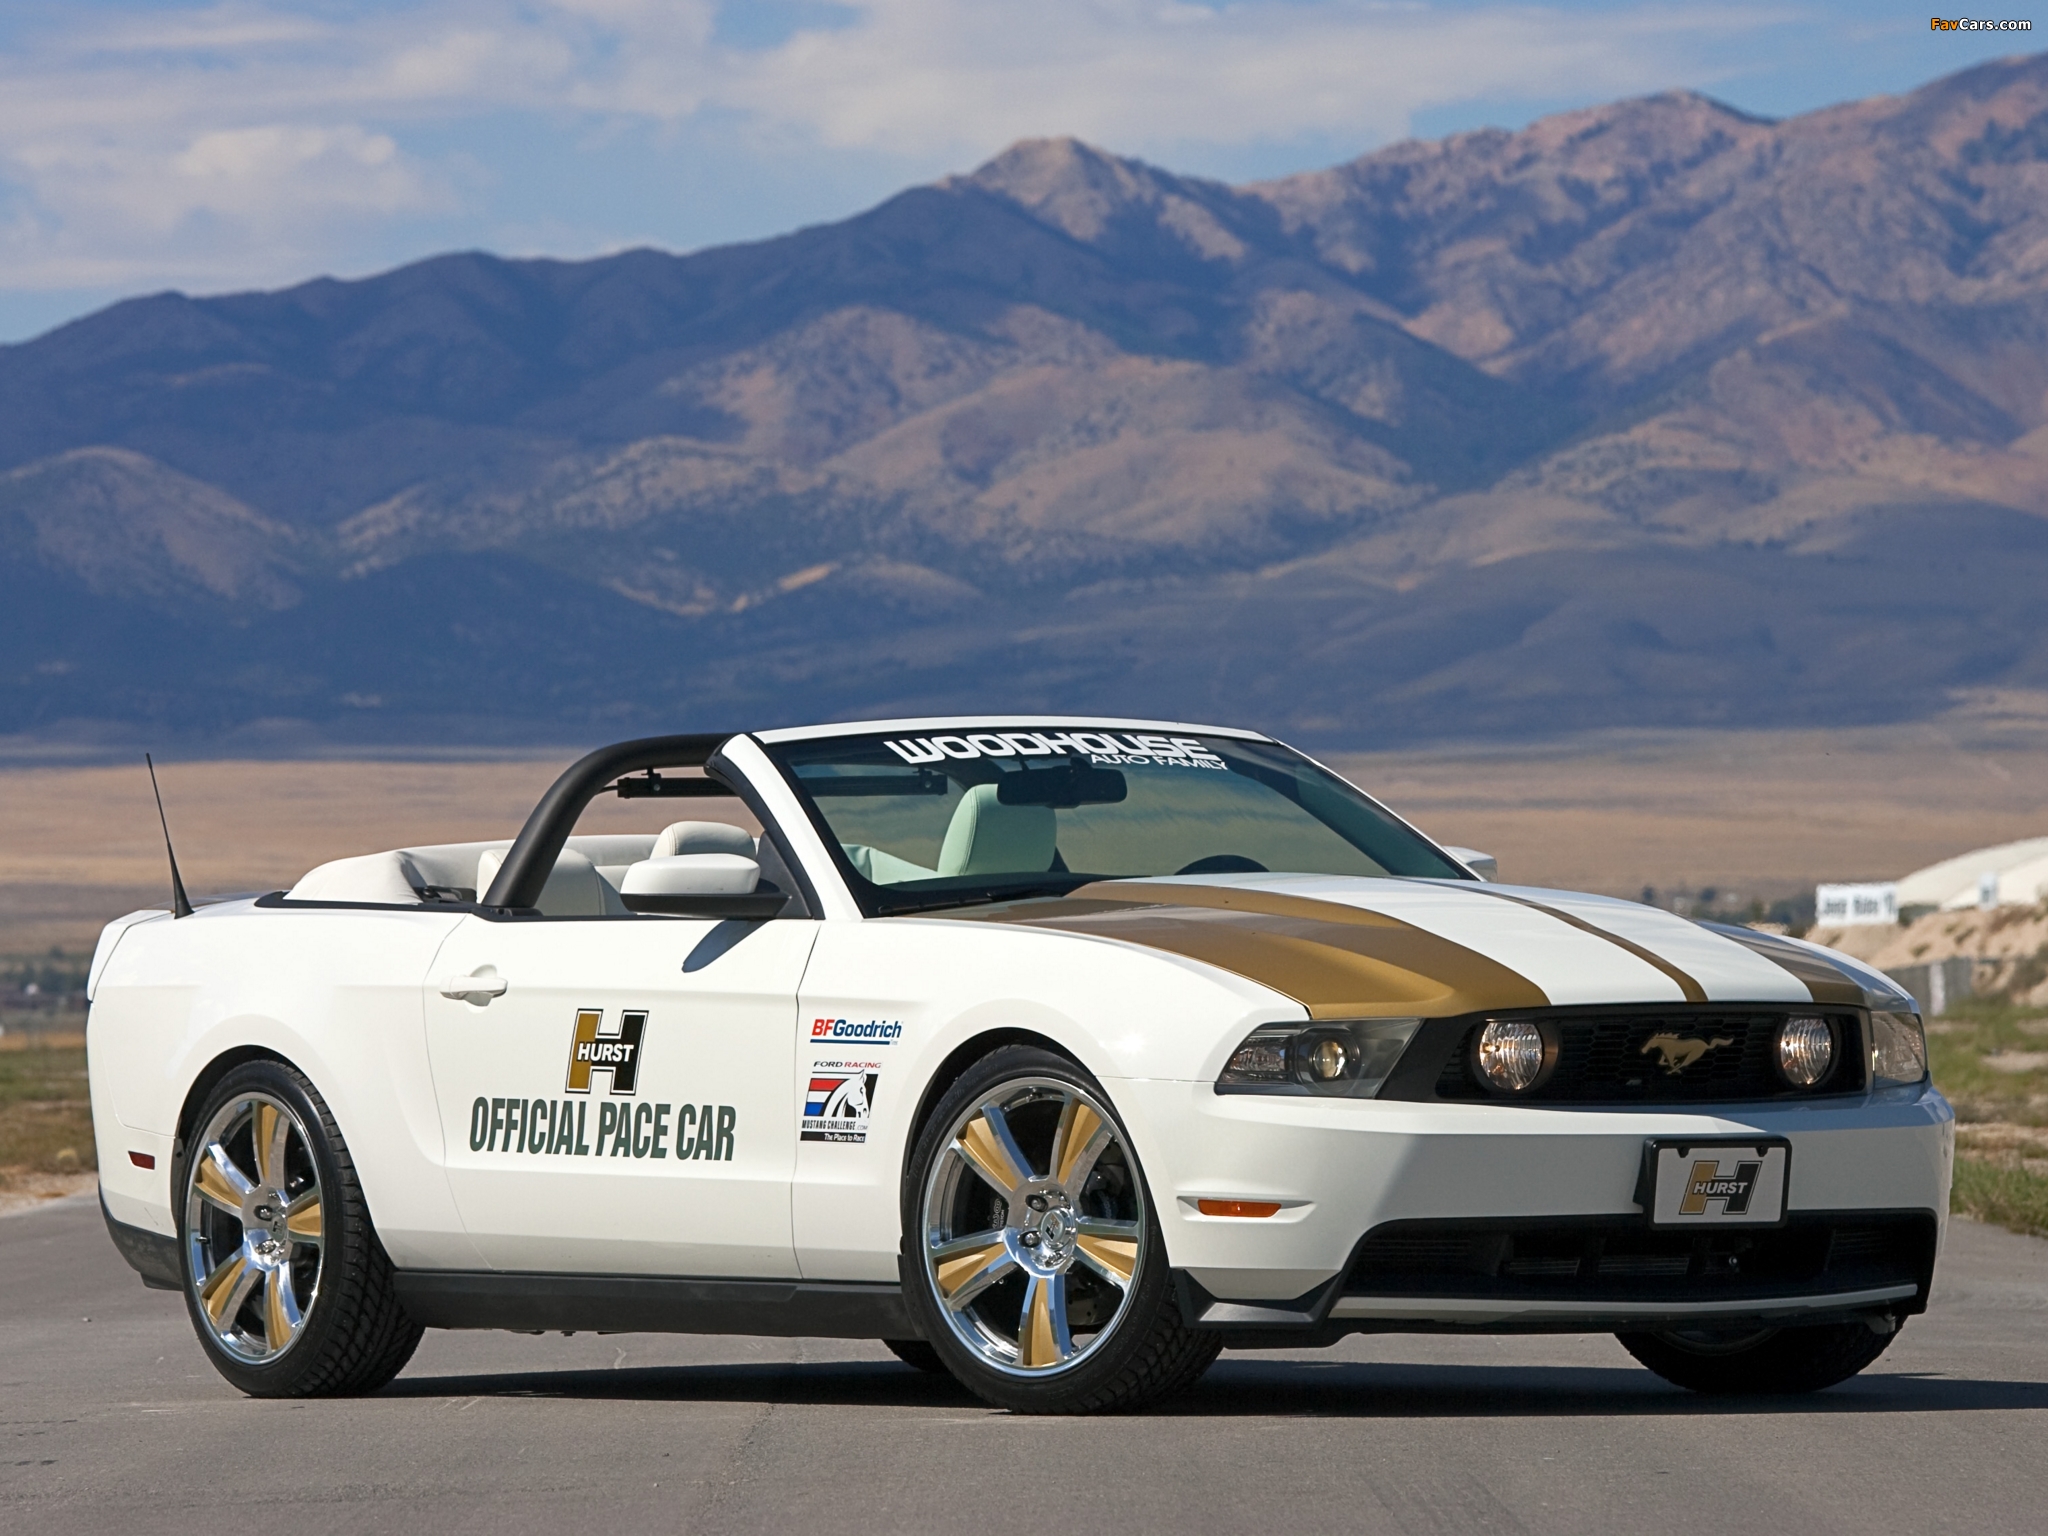 Hurst Mustang Convertible Pace Car 2009 pictures (2048 x 1536)